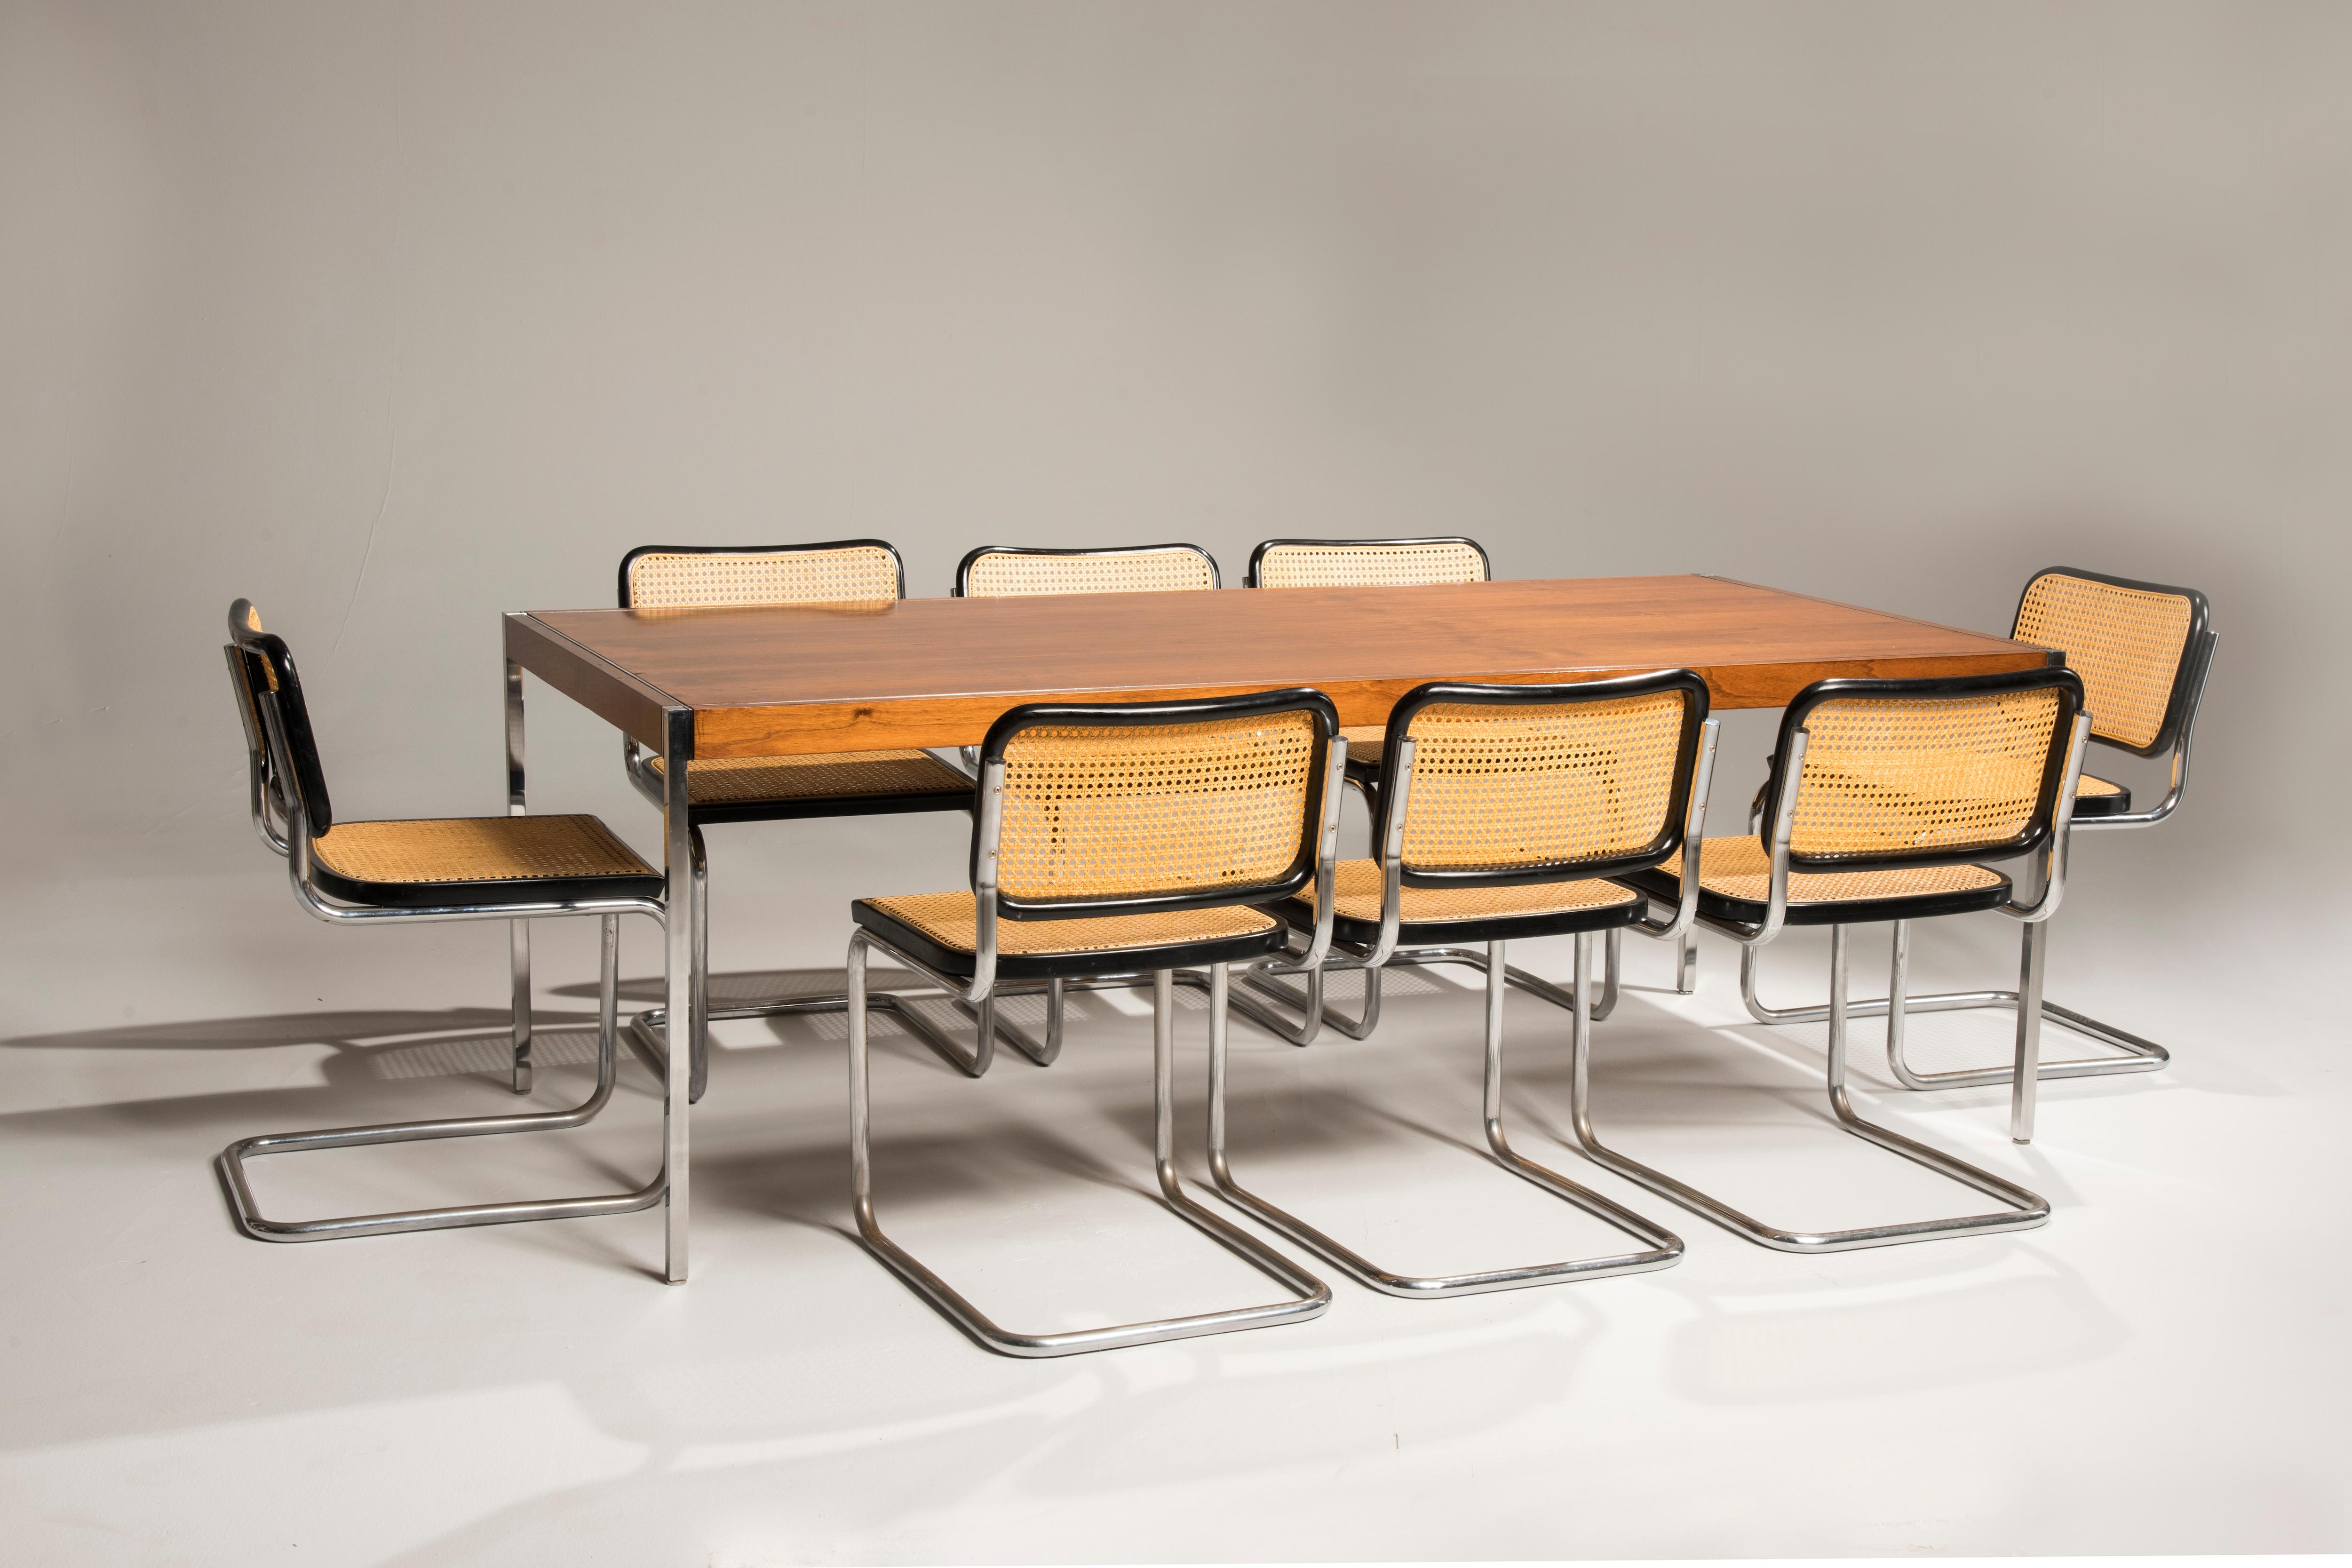 Bauhaus Marcel Breuer Cesca Chairs for Knoll Production, 8 Chairs Available 1